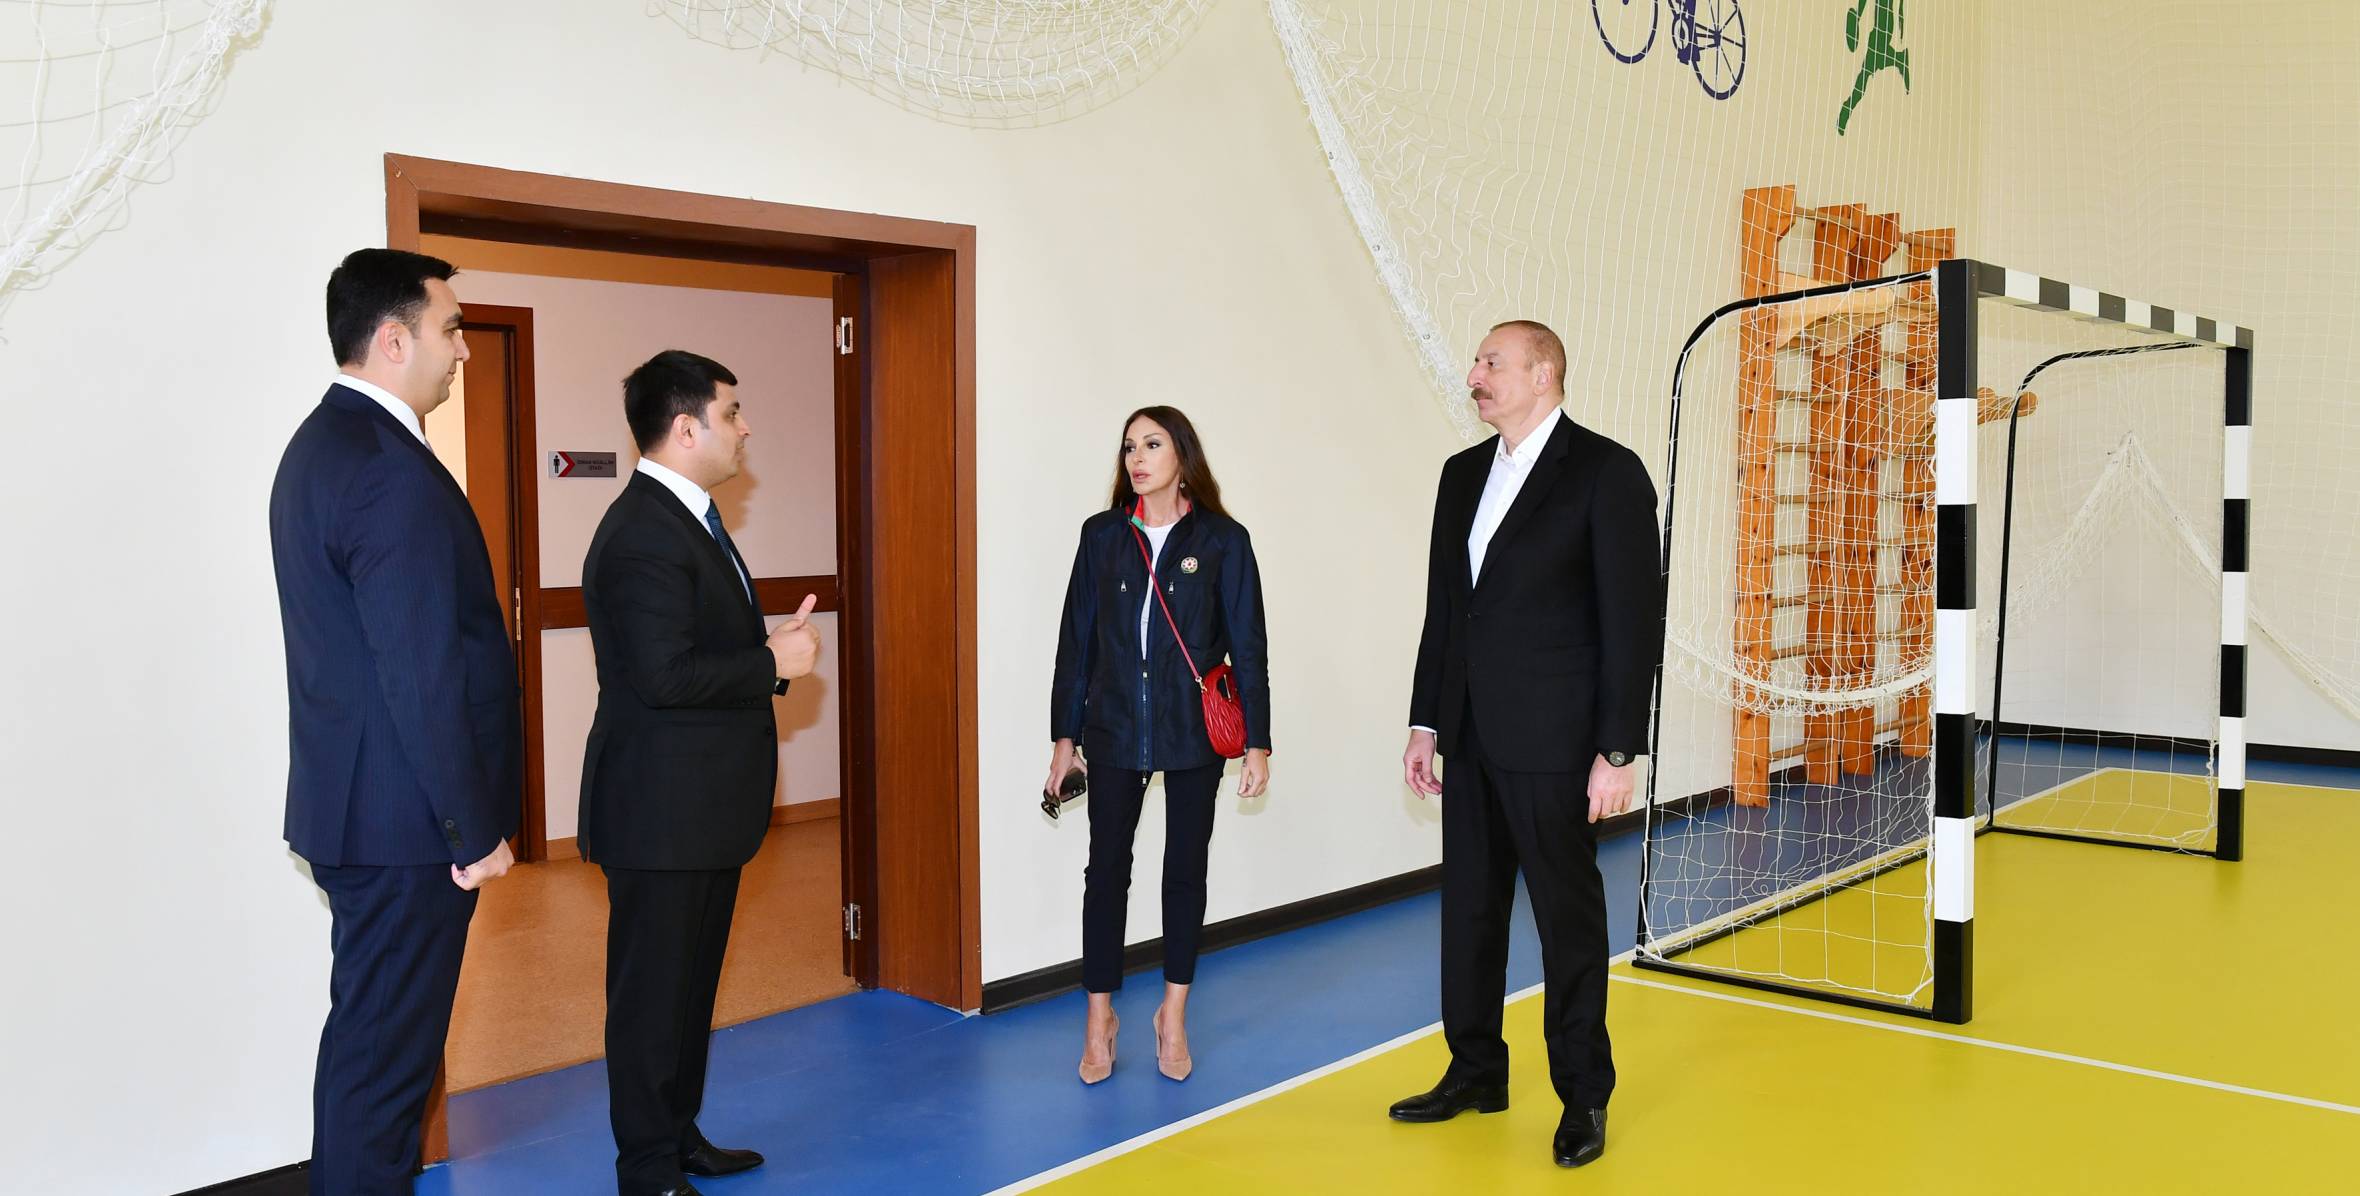 Ilham Aliyev and First Lady Mehriban Aliyeva have attended the opening of newly-built school in Neftchala district